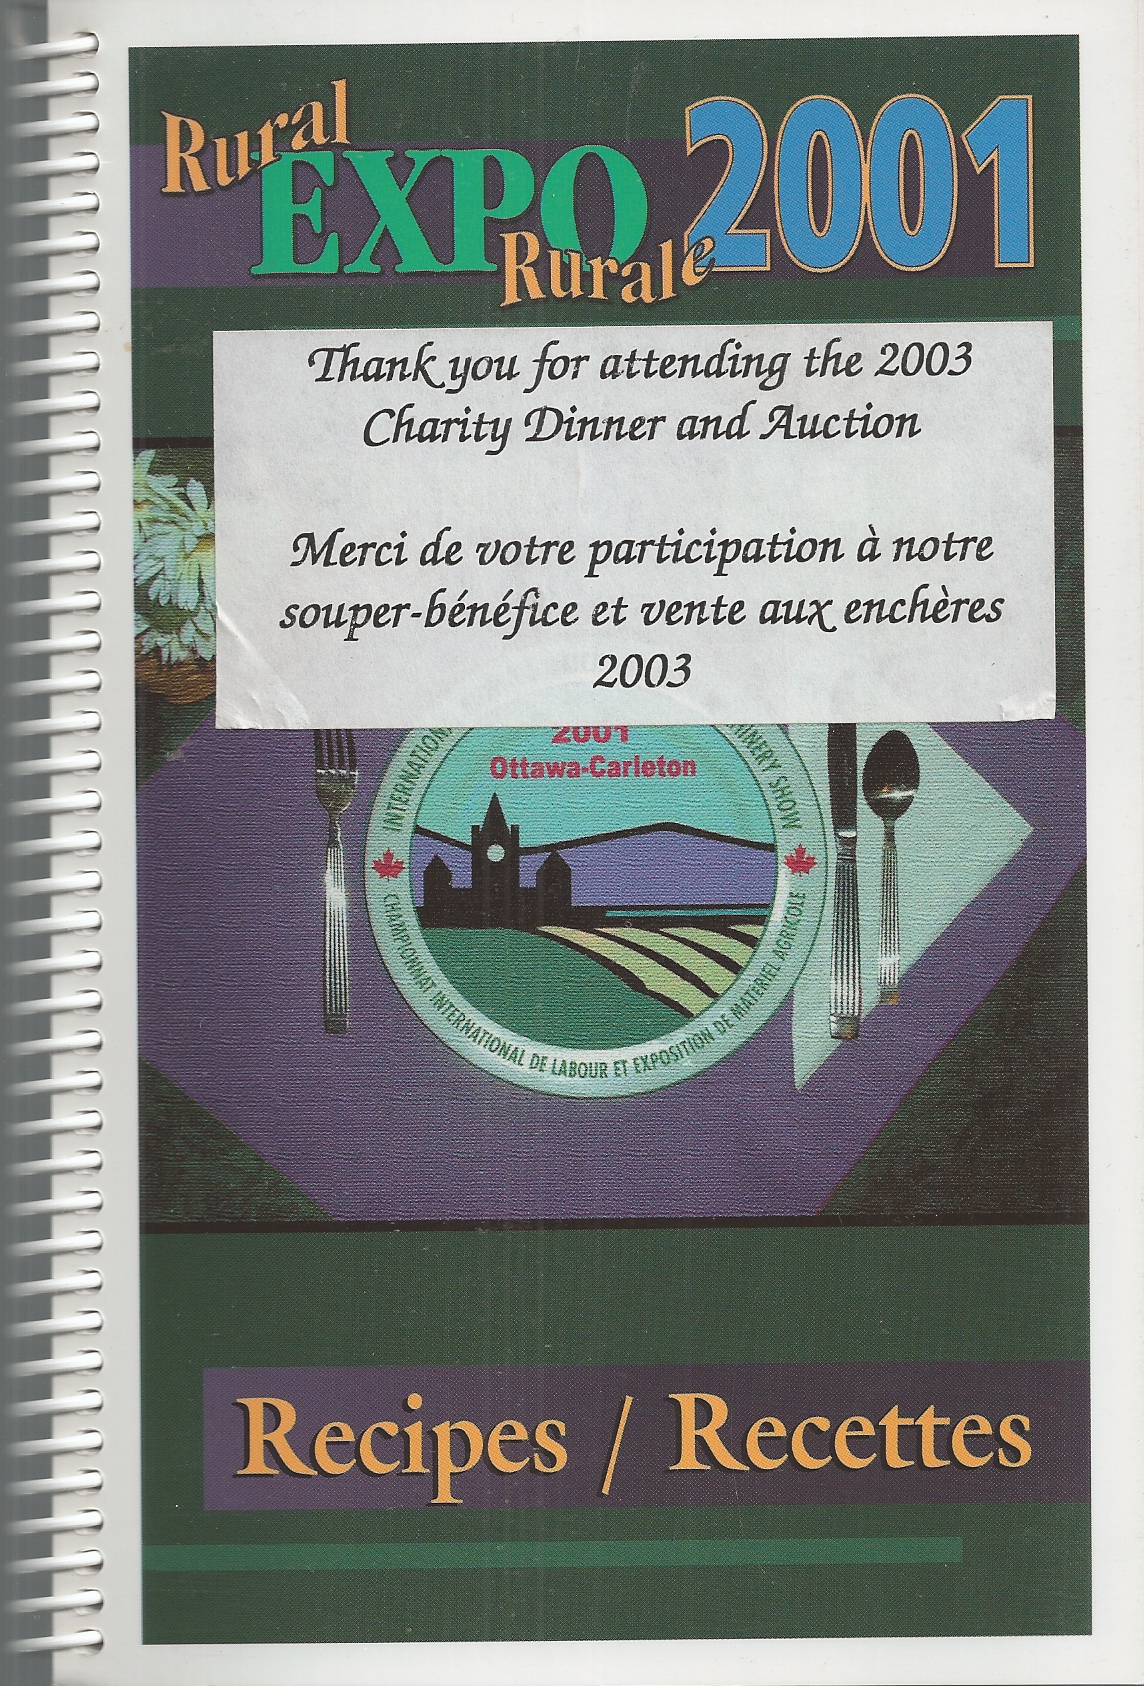 CUMBERLAND COMMUNICATION - Rural Expo Rurale 2001 Recipes / Recettes.